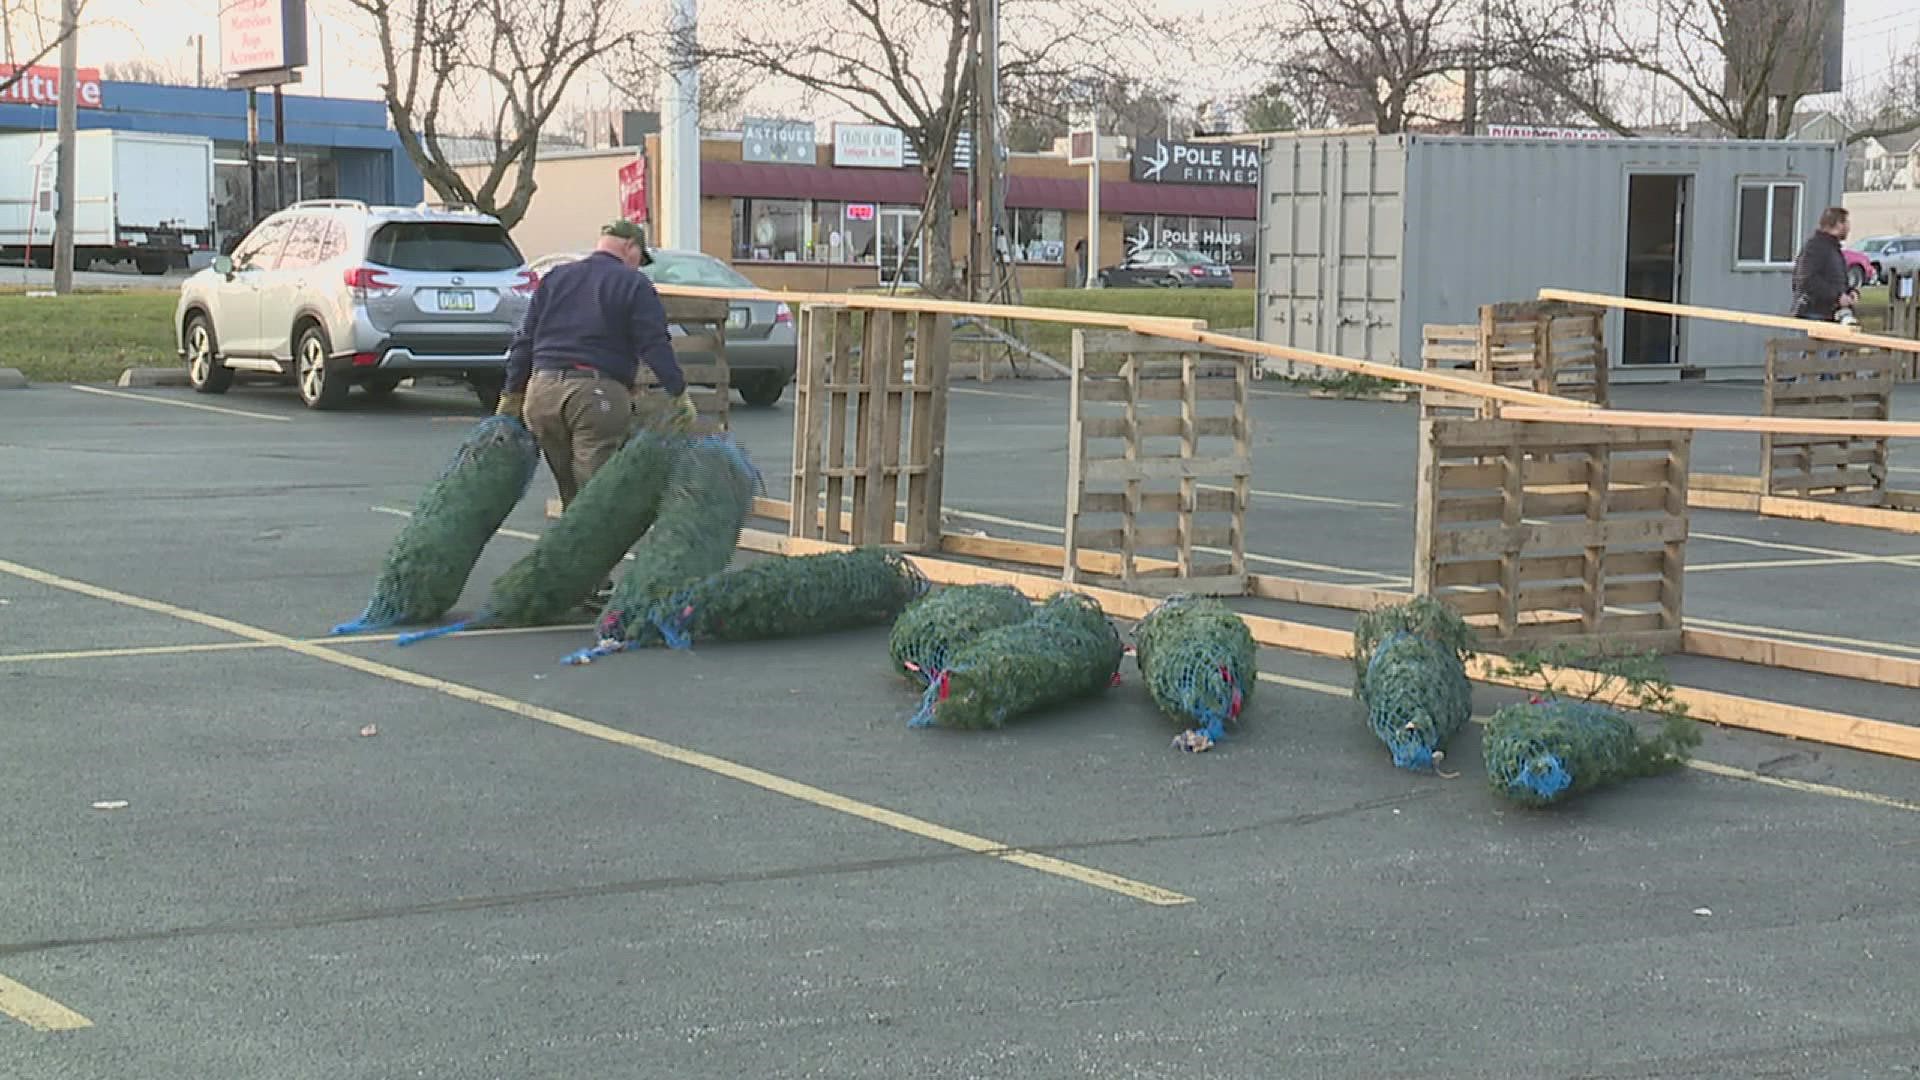 The club spent Wednesday preparing their Christmas Tree sale lot for opening day on Friday, offering a variety of trees to benefit local youth charities.